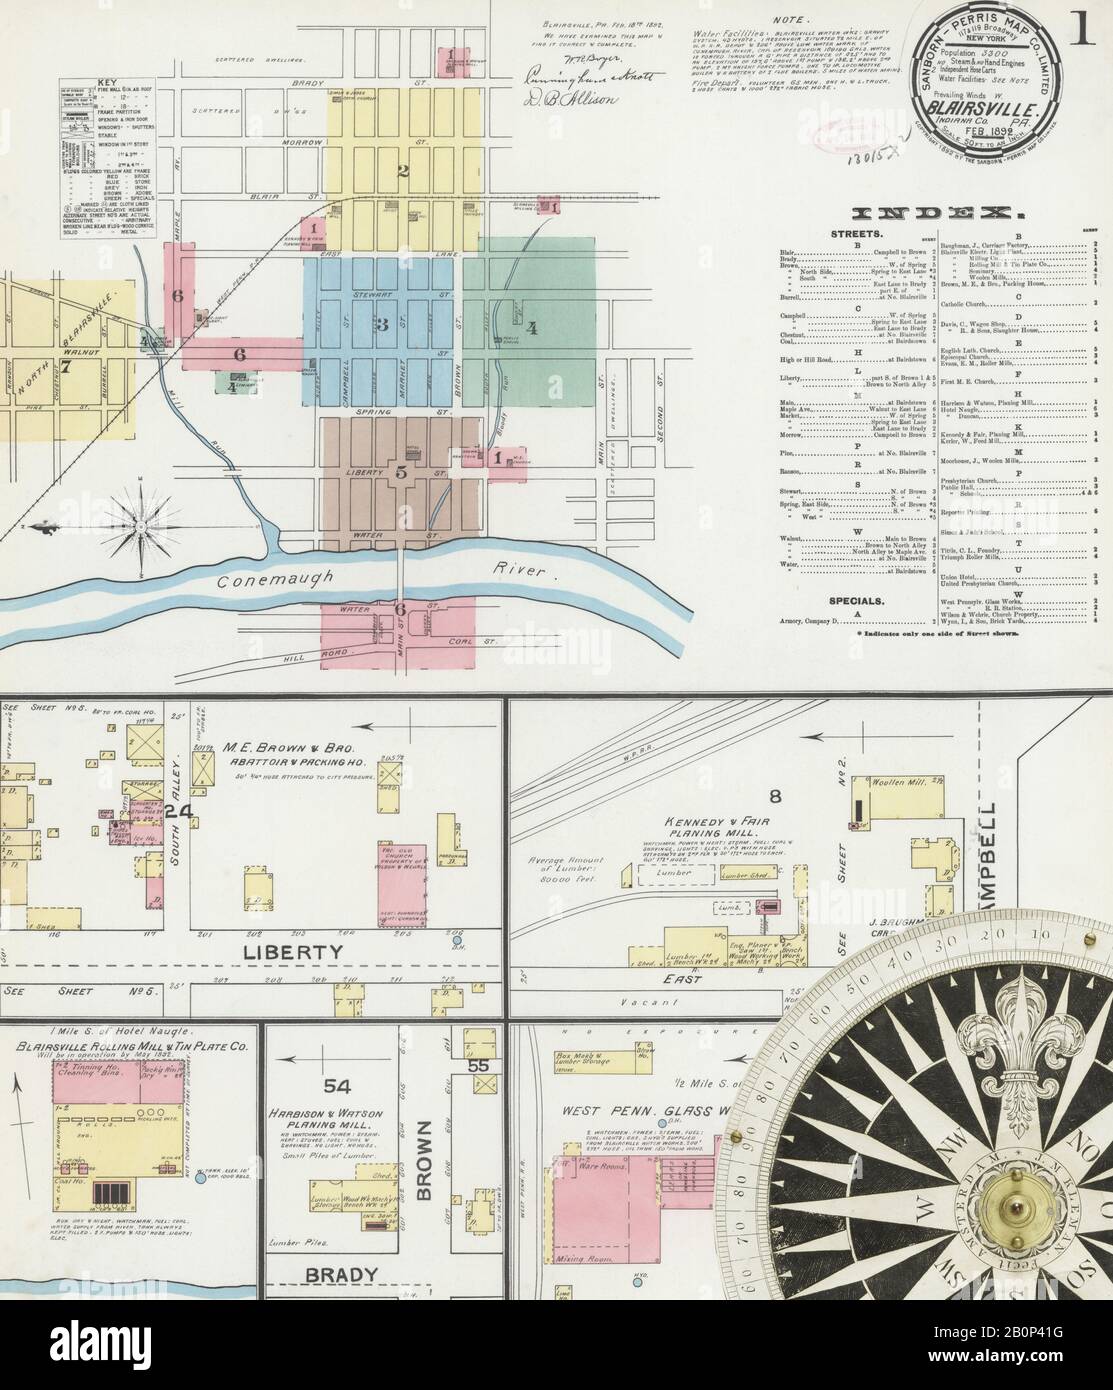 Image 1 of Sanborn Fire Insurance Map from Blairsville, Indiana County, Pennsylvania. Feb 1892. 7 Sheet(s), America, street map with a Nineteenth Century compass Stock Photo